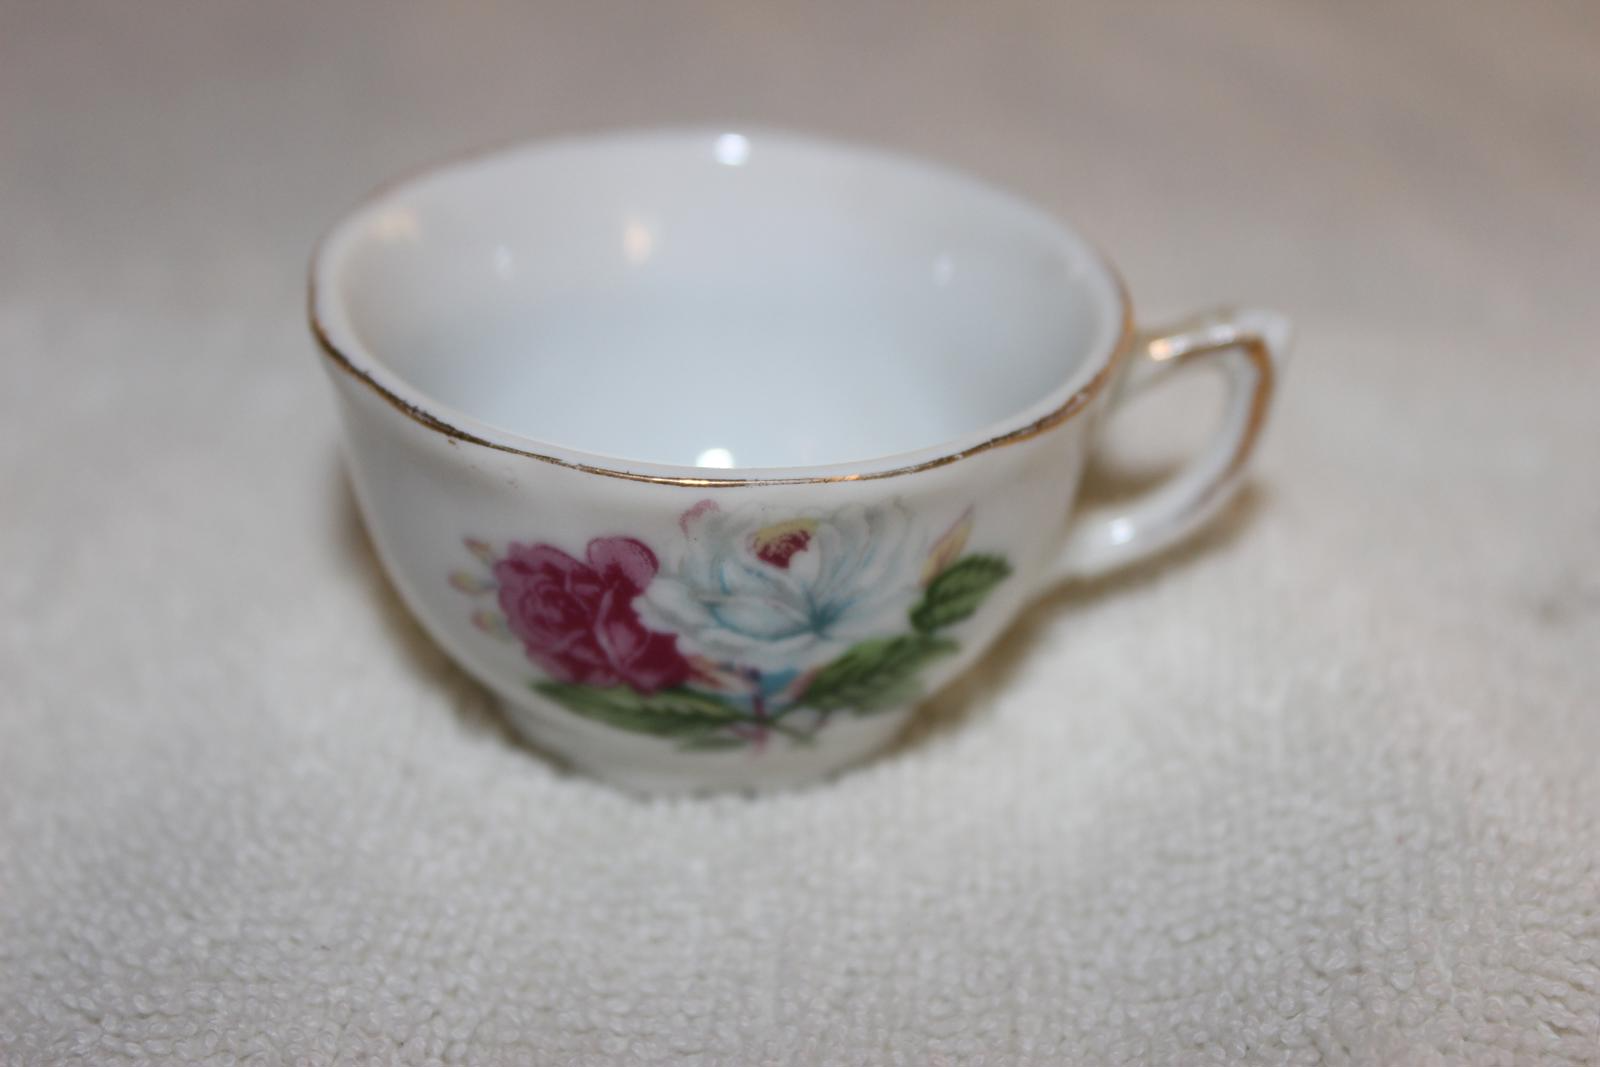 Primary image for VINTAGE MINIATURE TEACUP WHITE & FLORAL GOLD TRIM SCALLOPED 2" DIAMETER